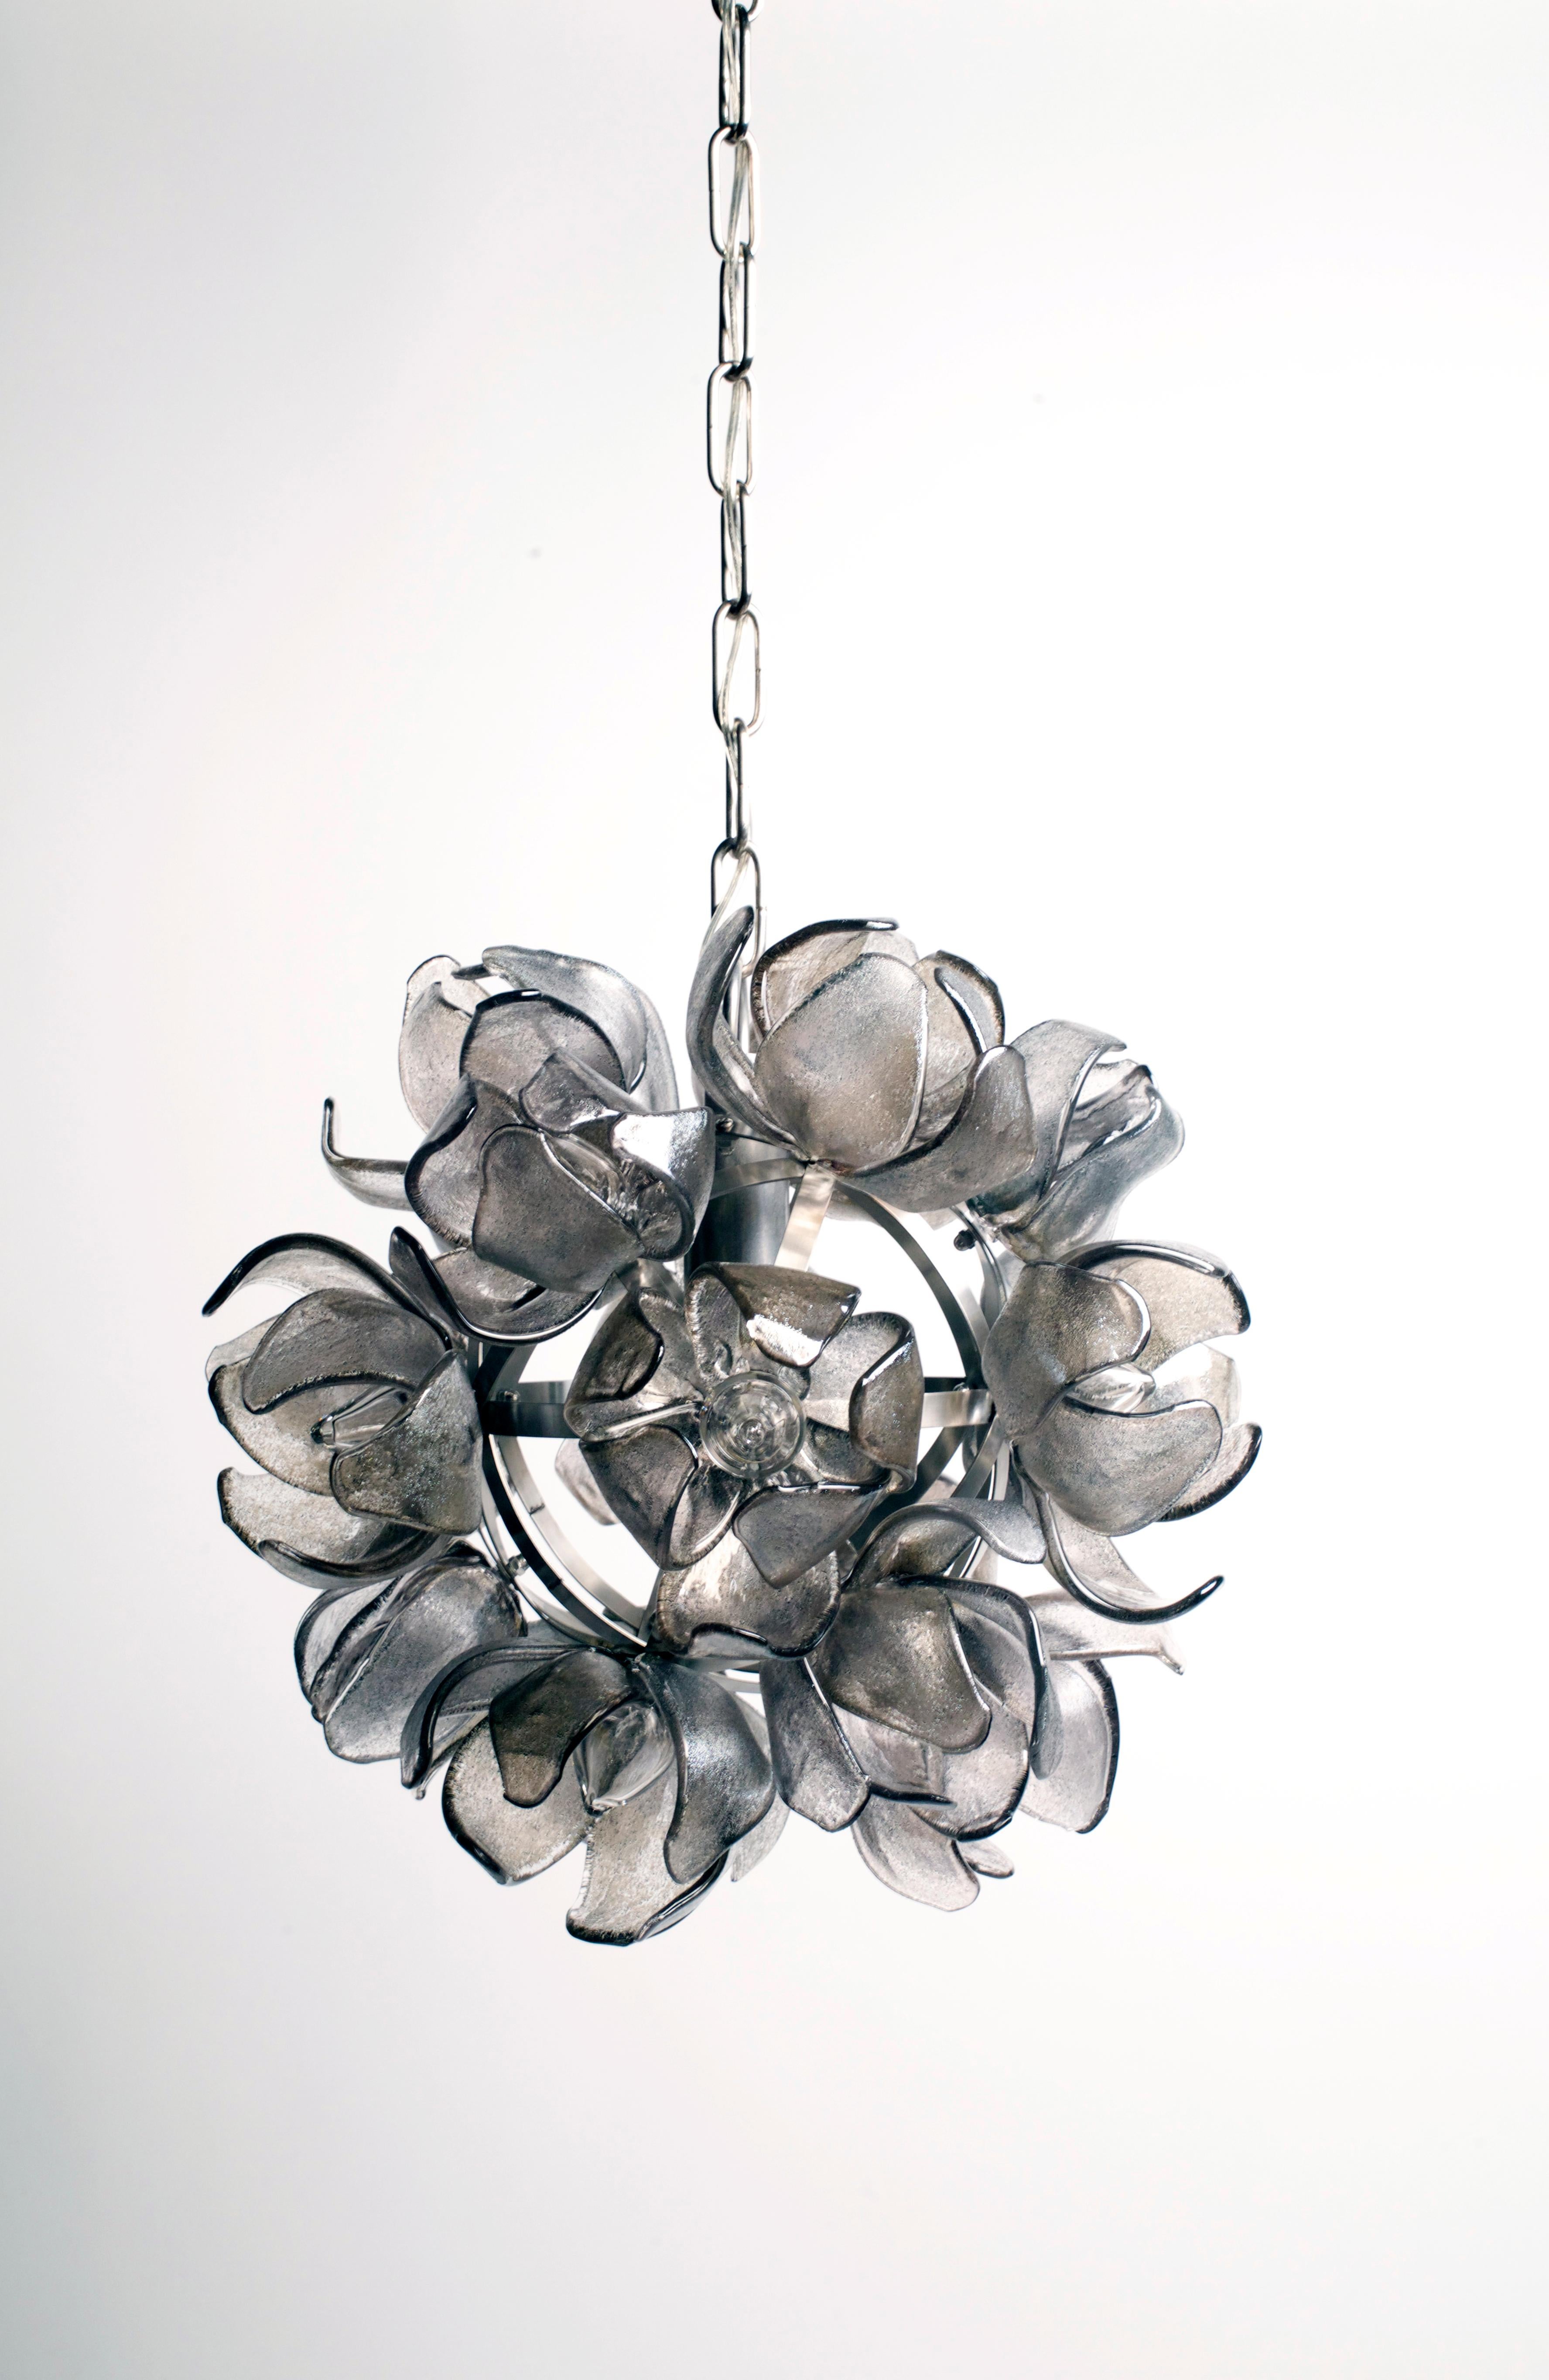 This smokey grey glass Magnolia Chandelier on a stainless steel structure by Elizabeth Lyons is one of the round floral series. A total of 18 glass magnolias adorn a stainless steel structure to create a gorgeous 16